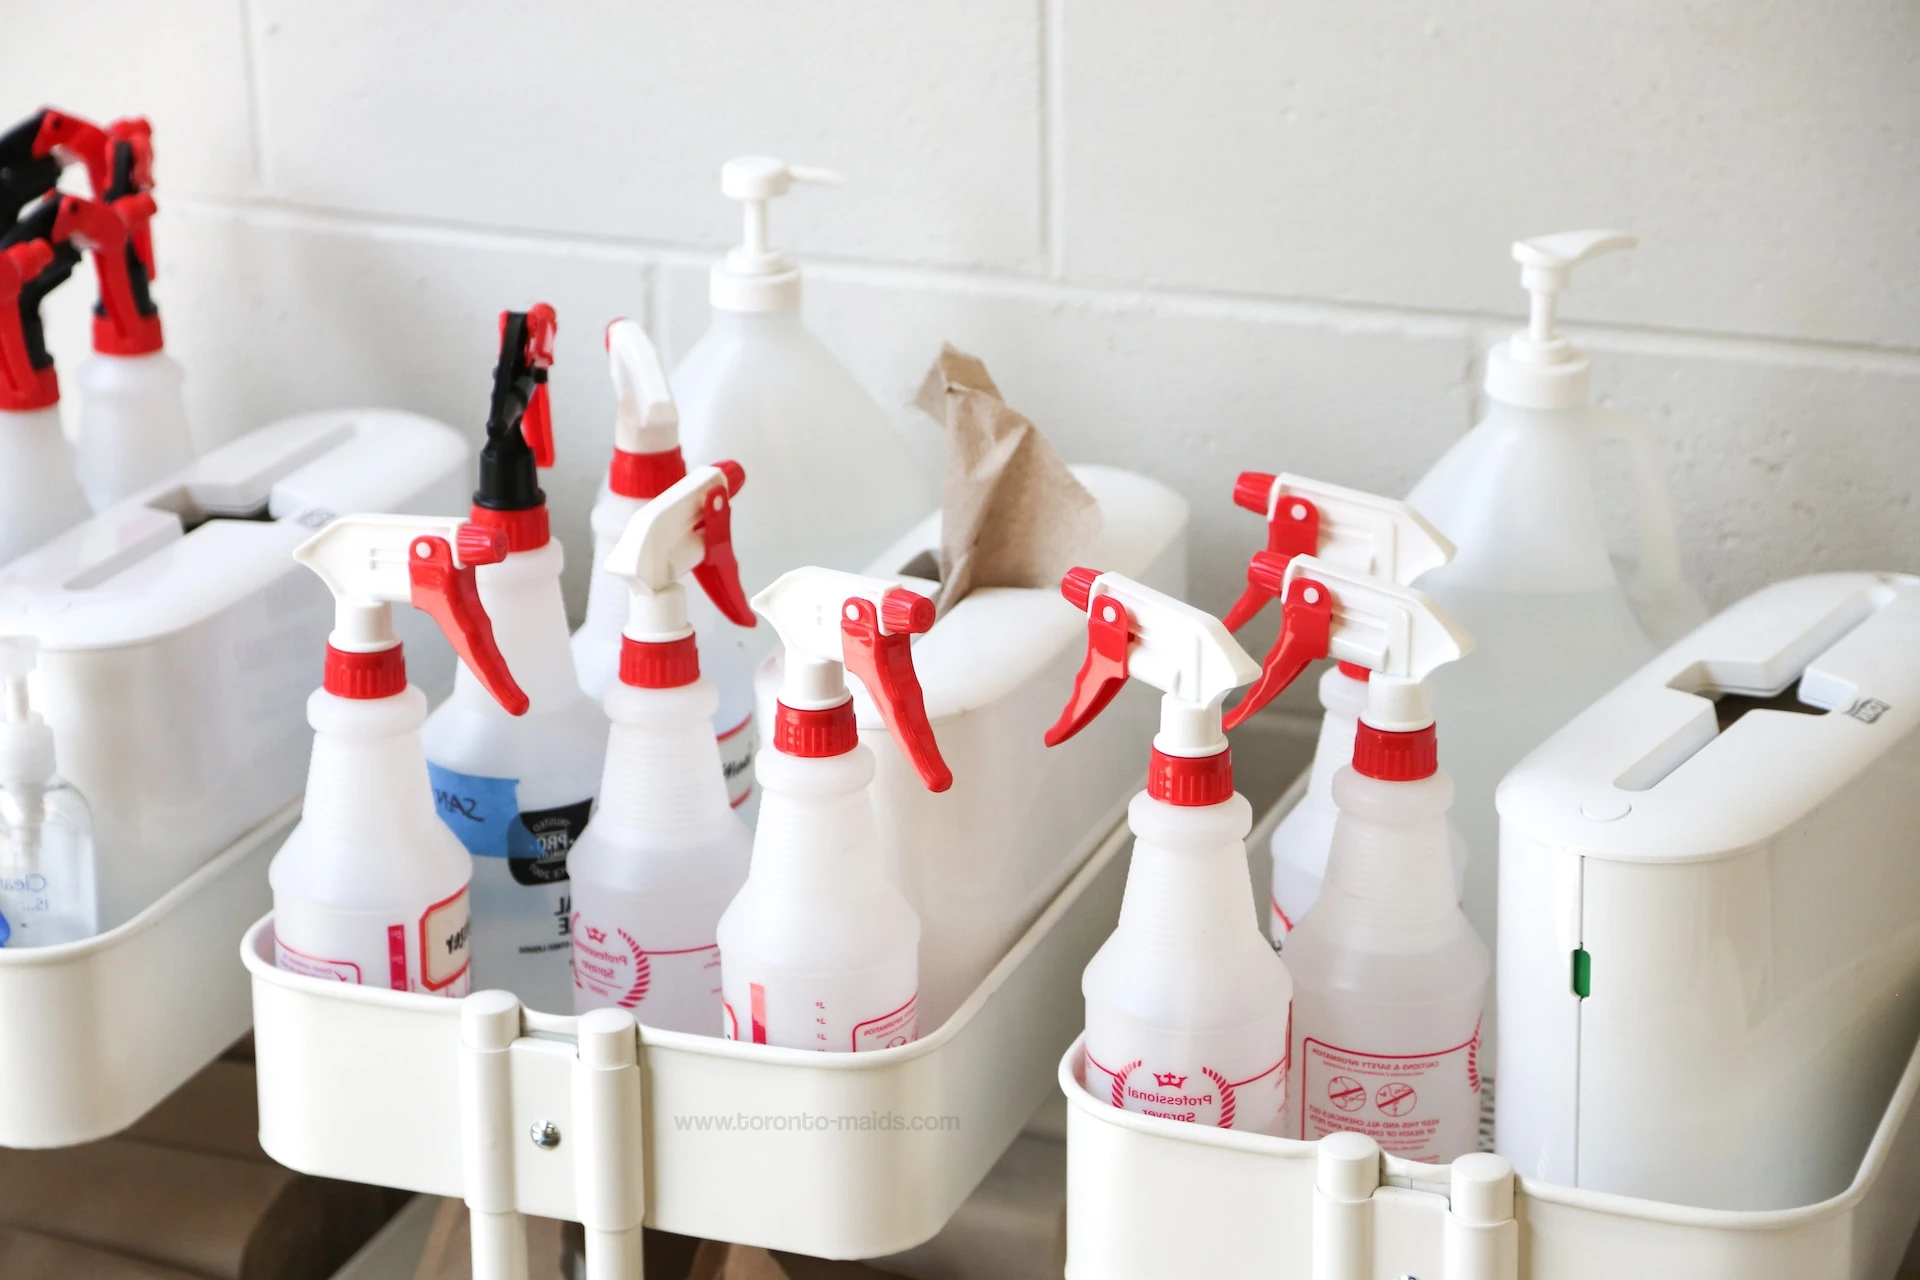 Spray bottles for cleaning and disinfecting your home - Toronto Maids